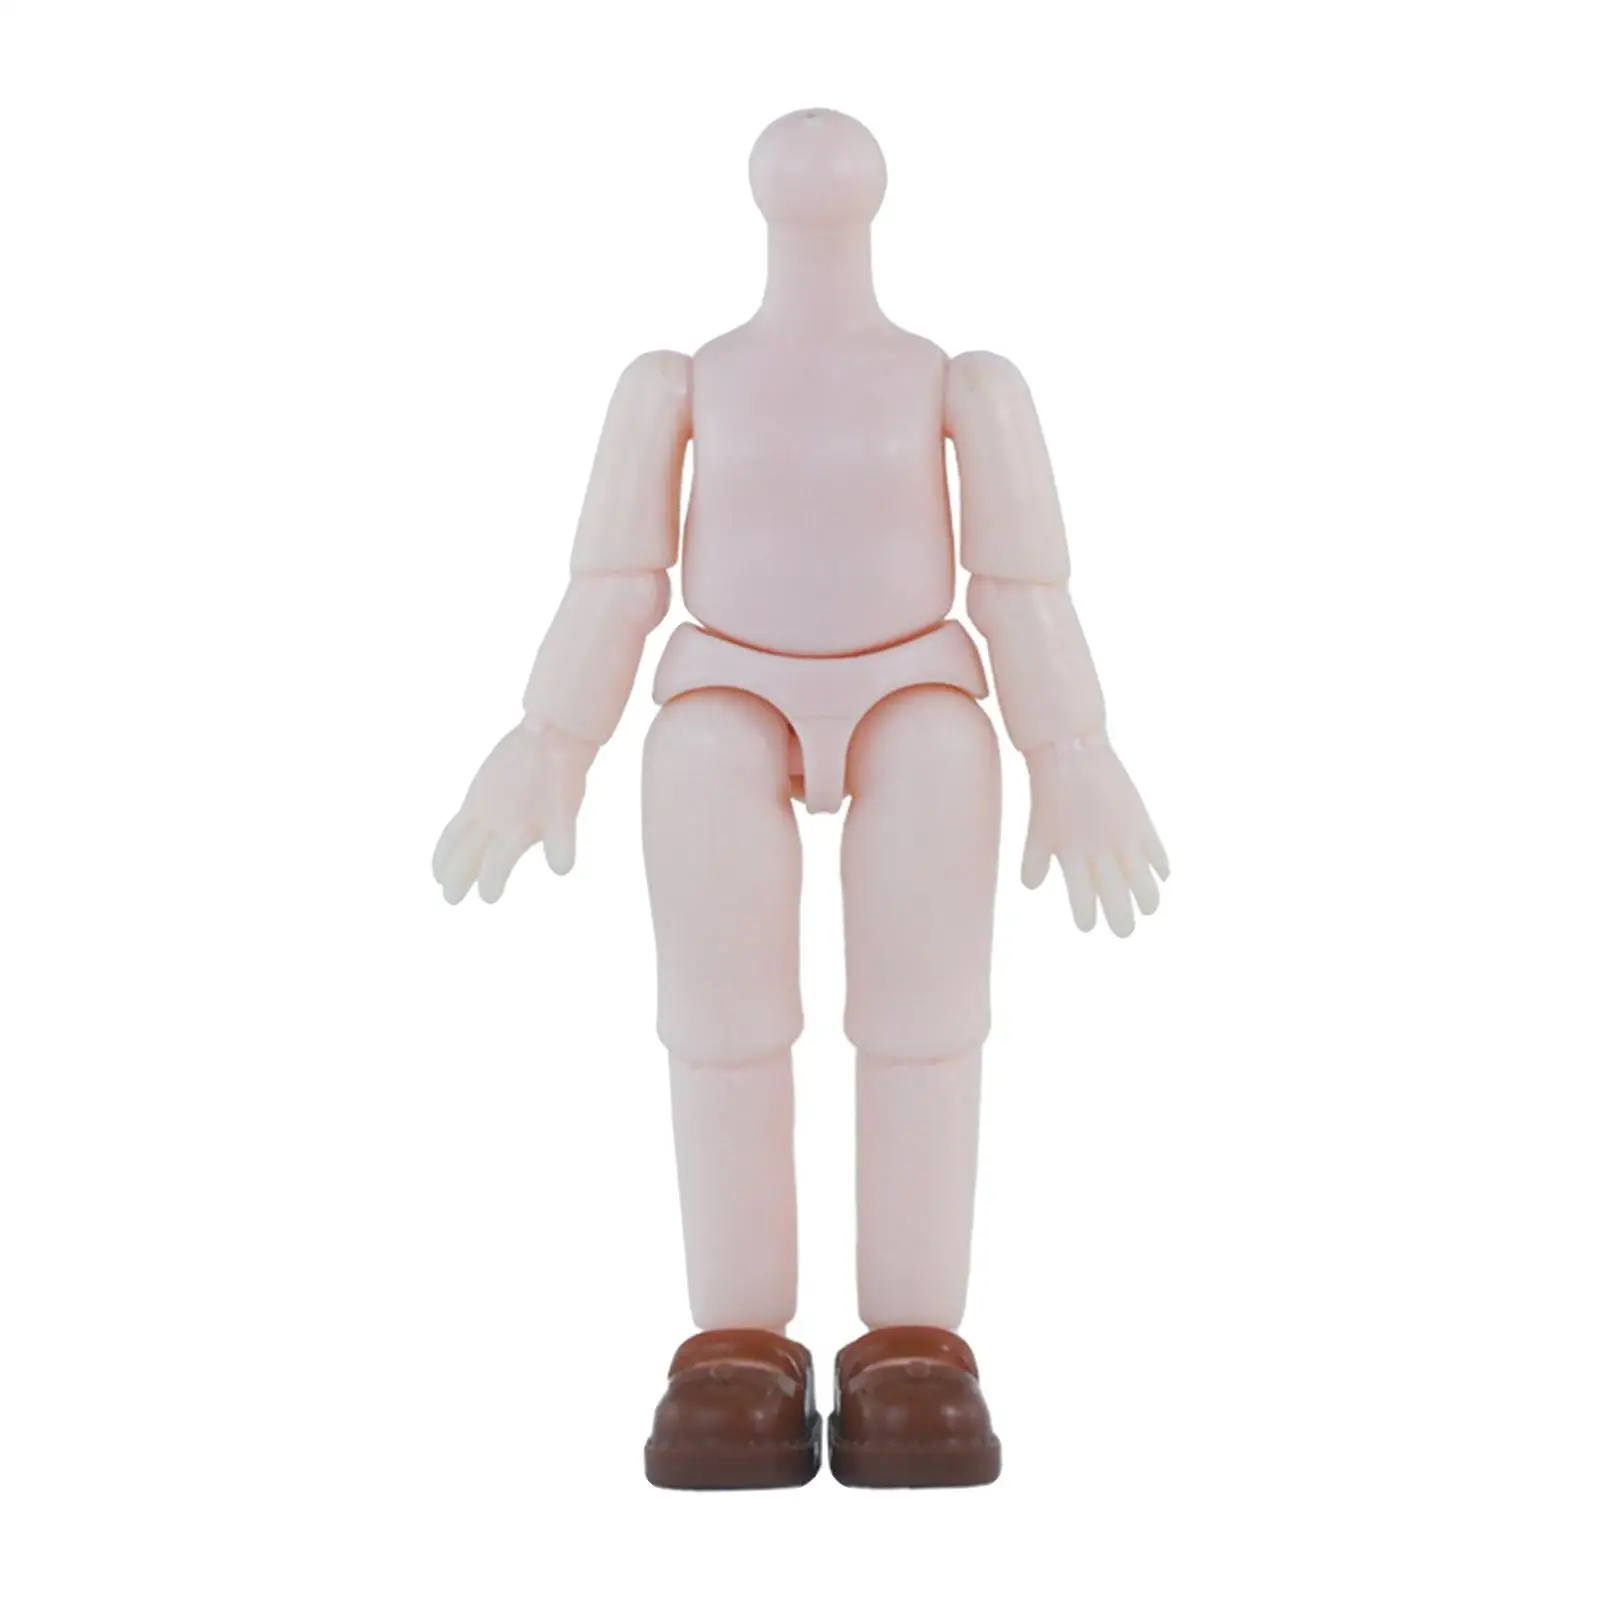  Doll Body Model Ob11 Gift Parts Moveable Figure Action Boys